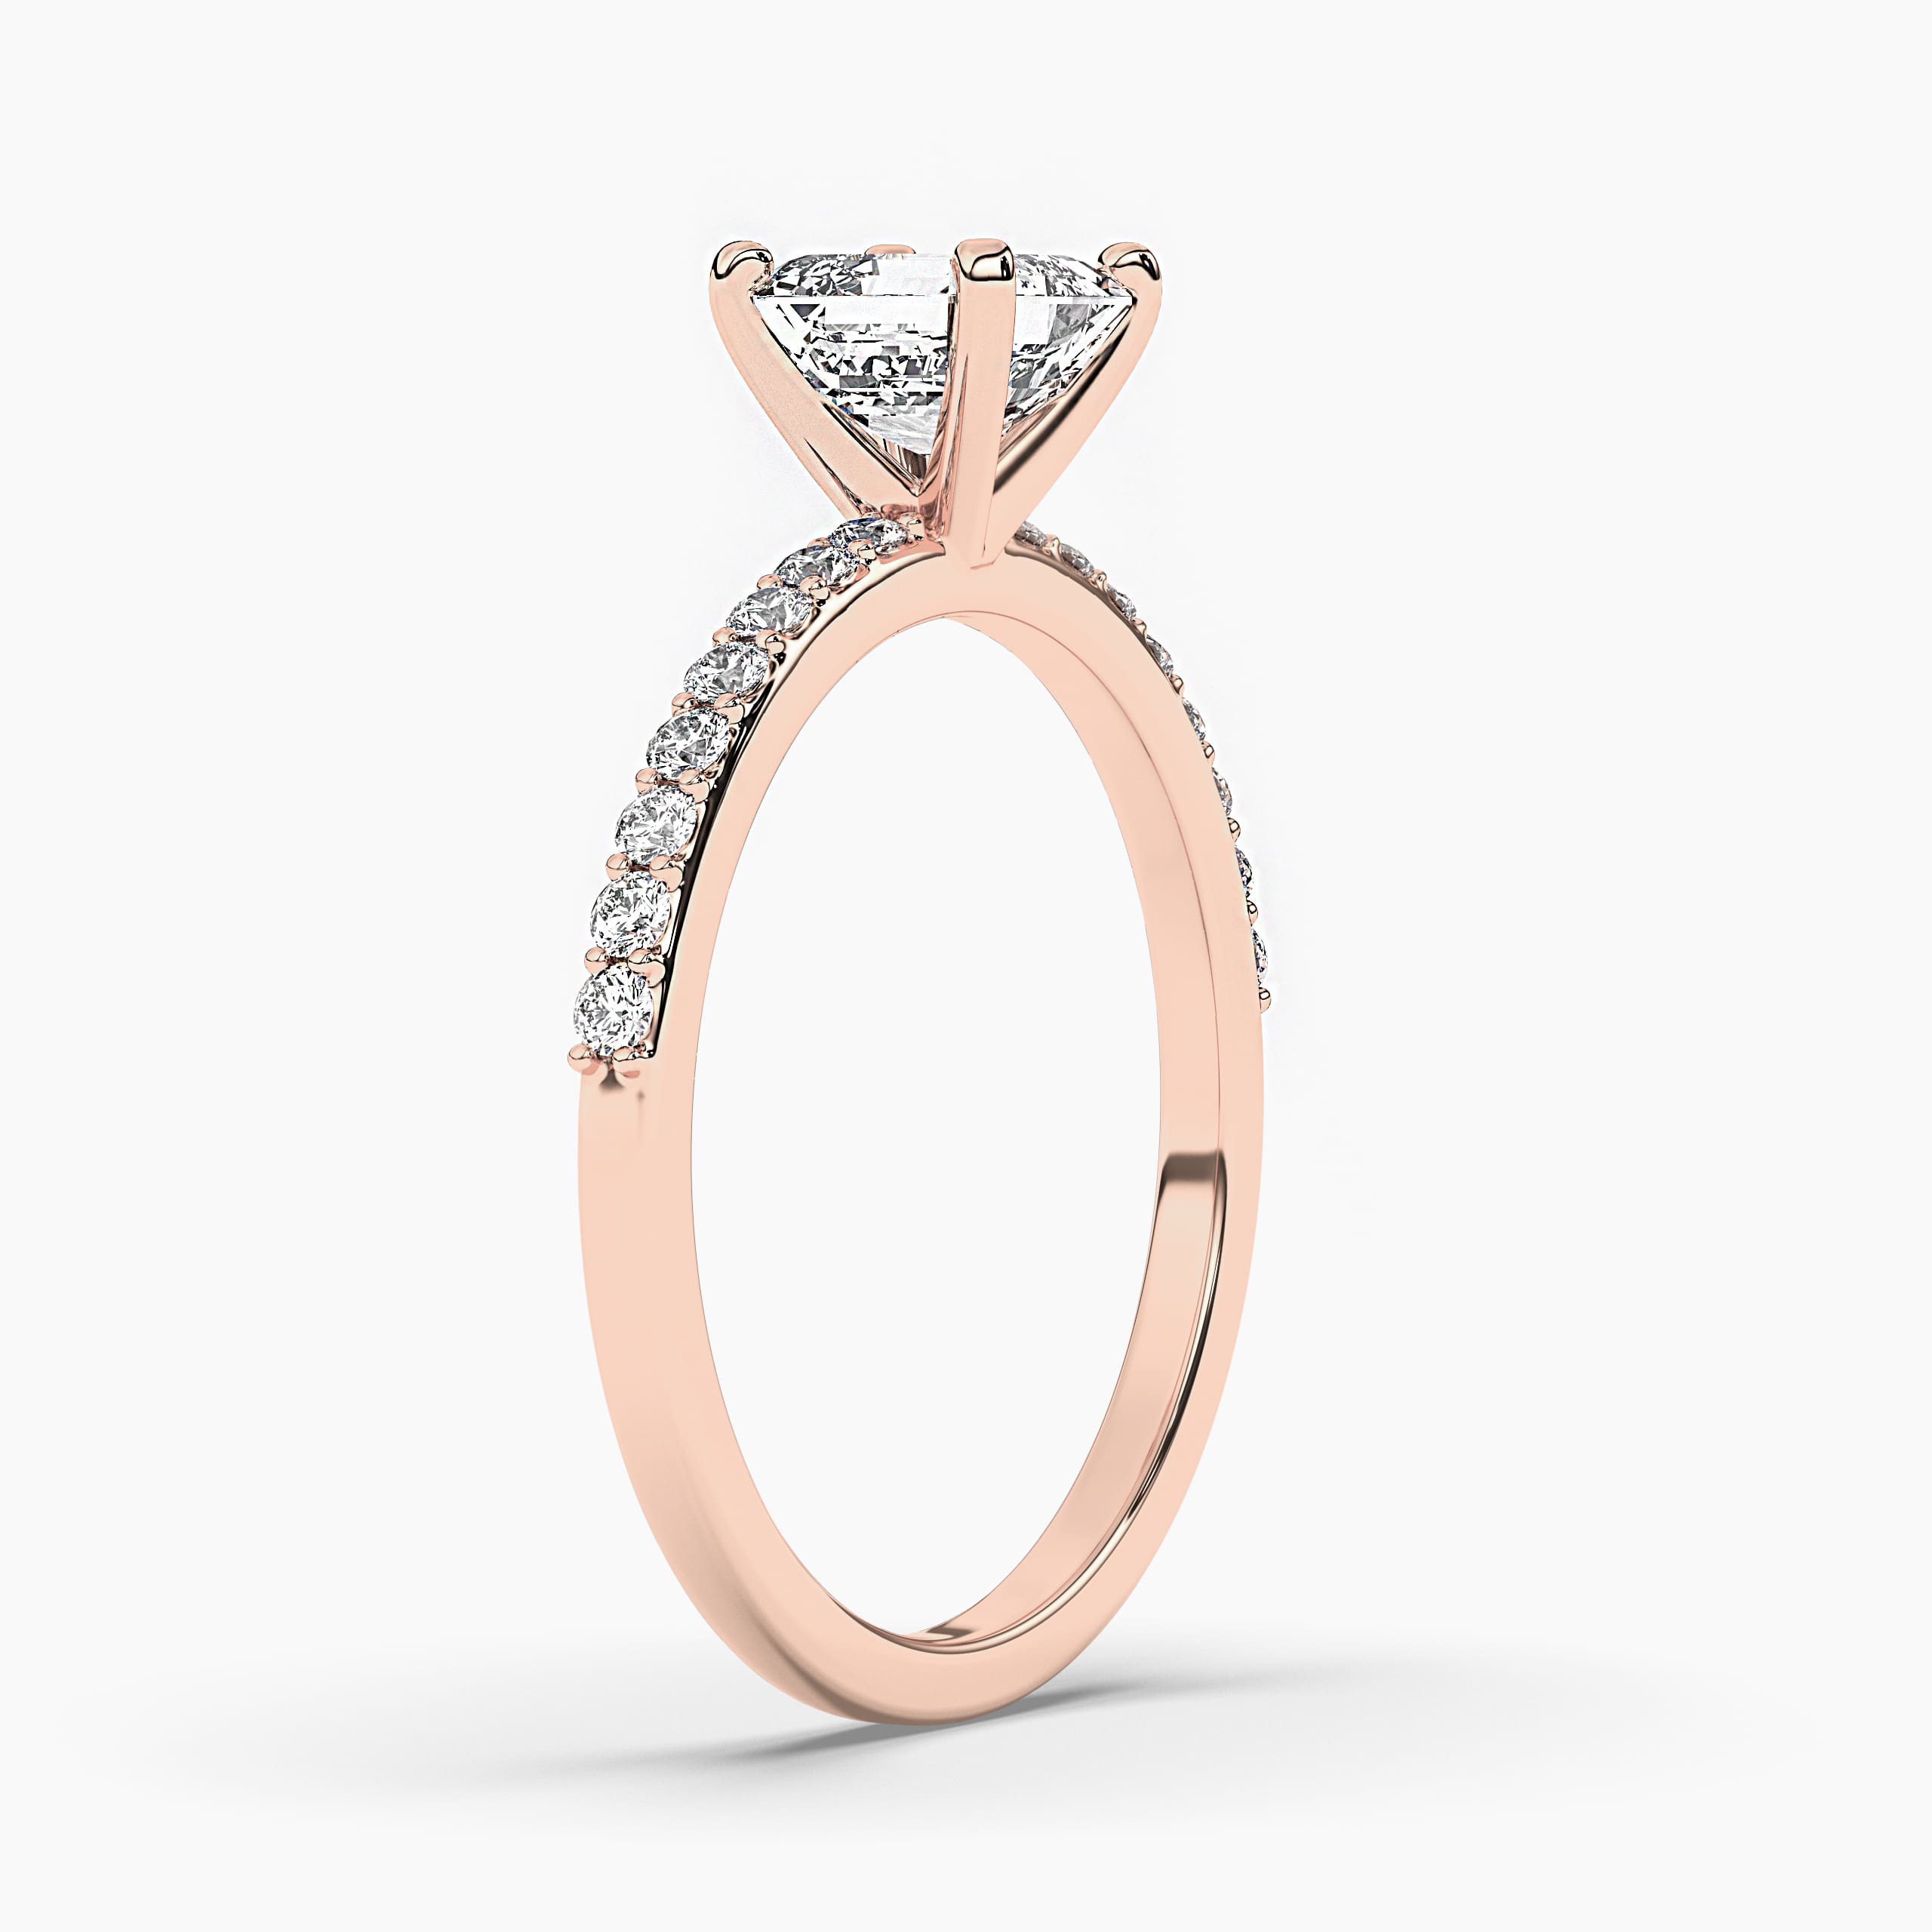 OVAL CUT DIAMOND ENGAGEMENT RING IN ROSE GOLD